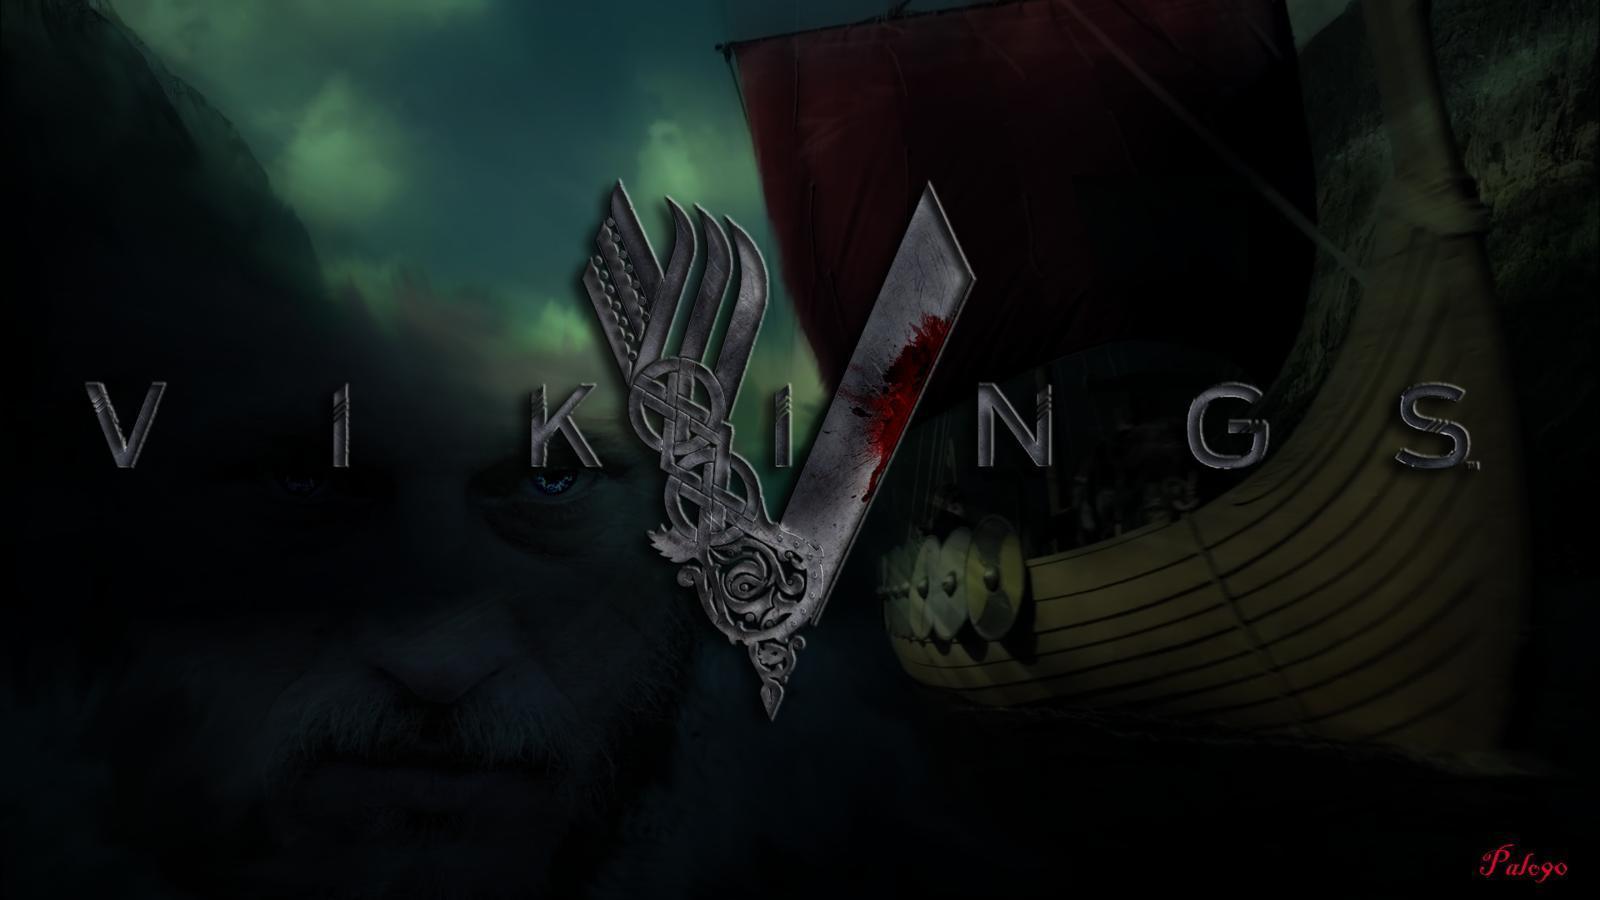 Vikings History Channel Wallpapers by palo90